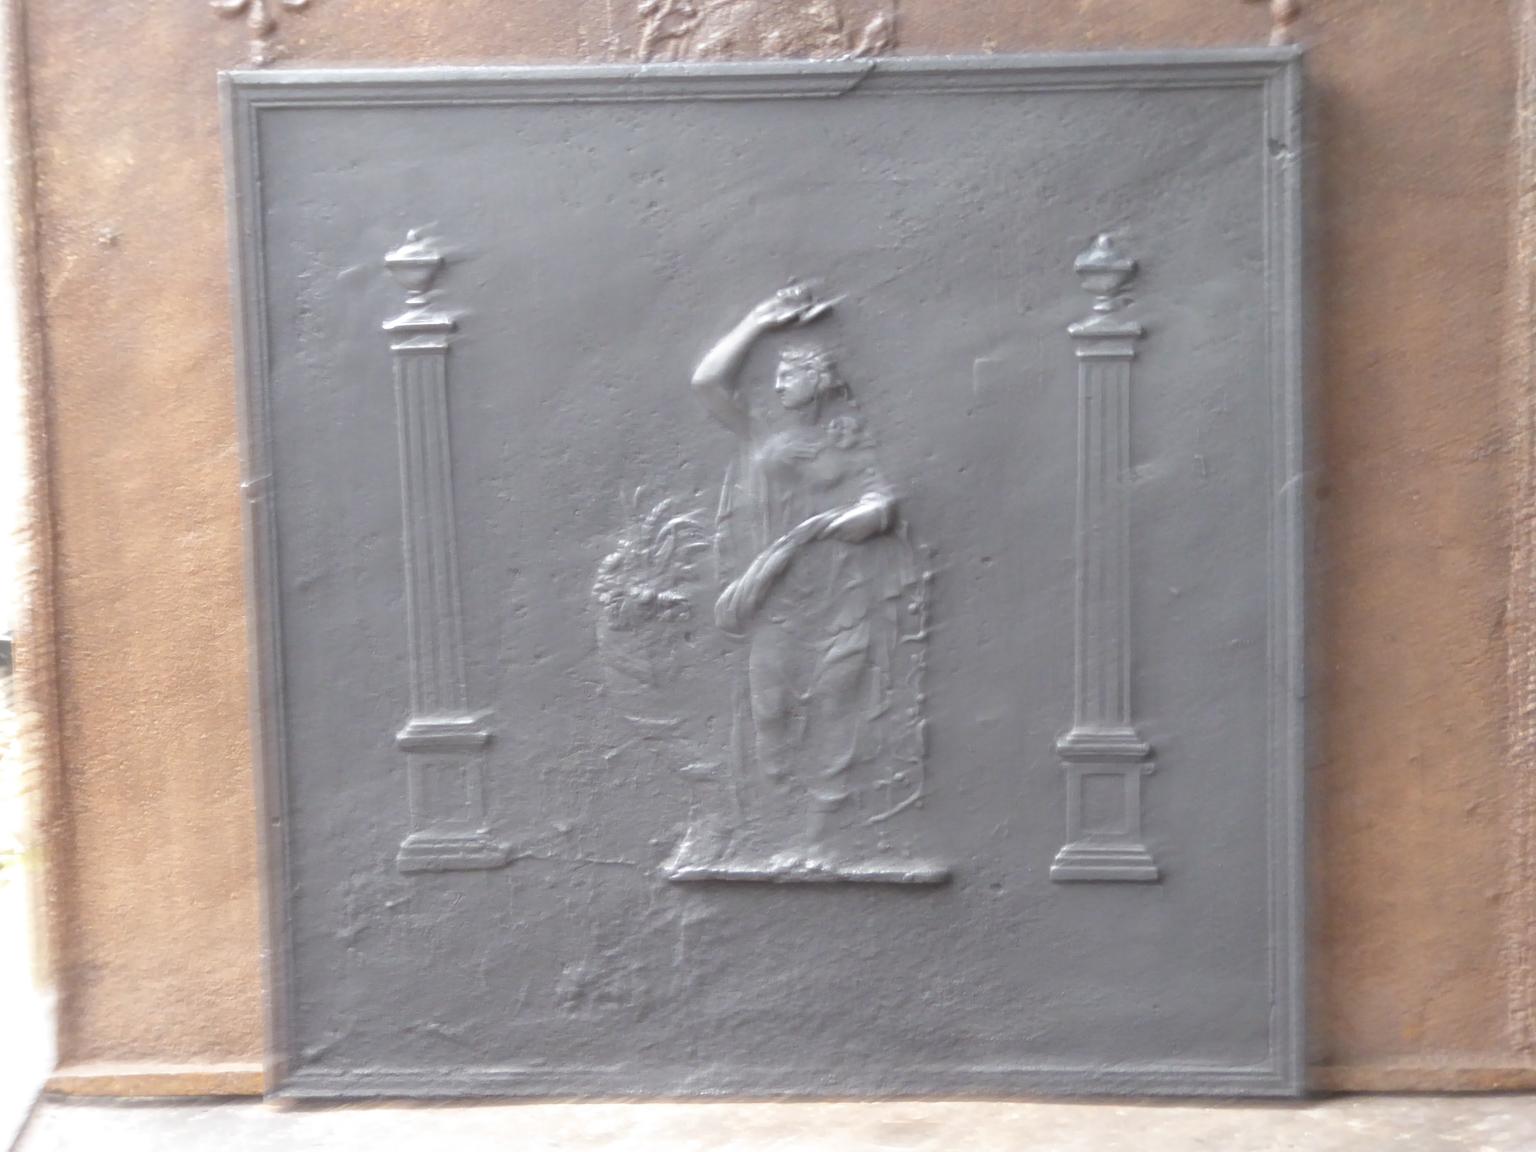 19th century French neoclassical fireback with the goddess Ceres. Goddess of agriculture (particularly grain) and the maternal love. Ceres is flanked by two pillars of liberty. They stand for one of the three values of the French Revolution.

The